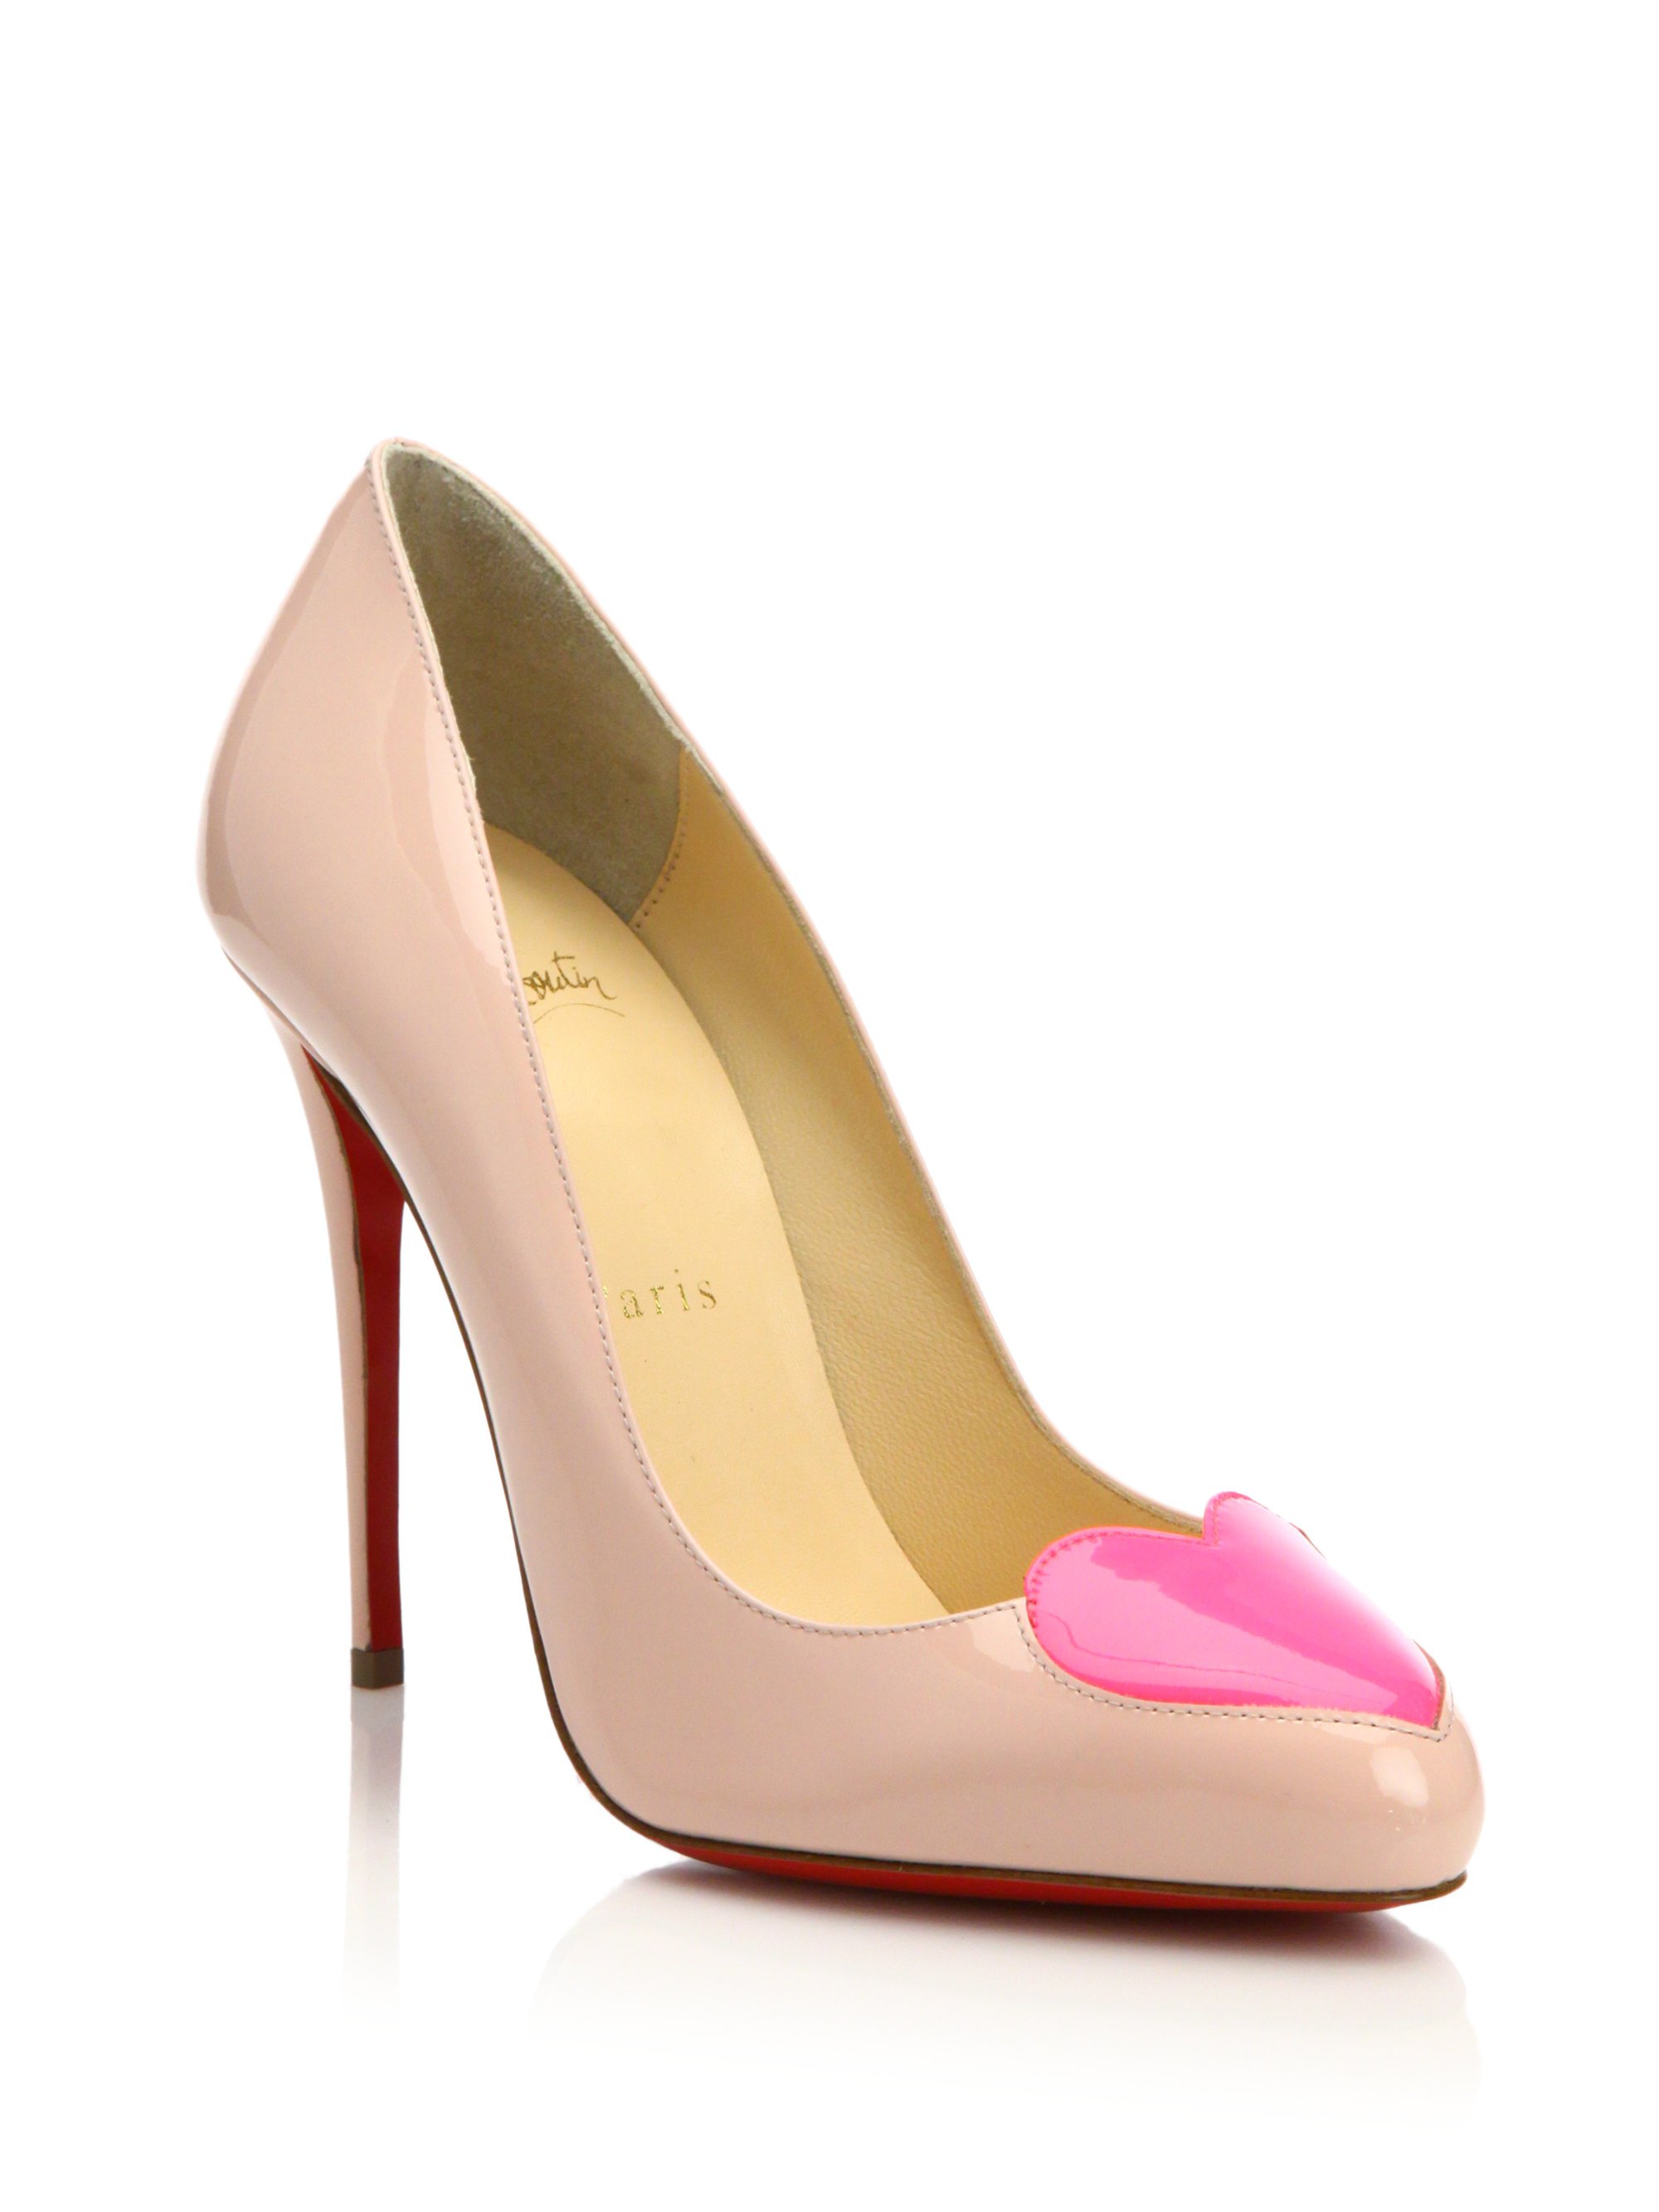 louboutin spikes sneakers - Christian louboutin Doracora Heart Patent Leather Pumps in Pink ...